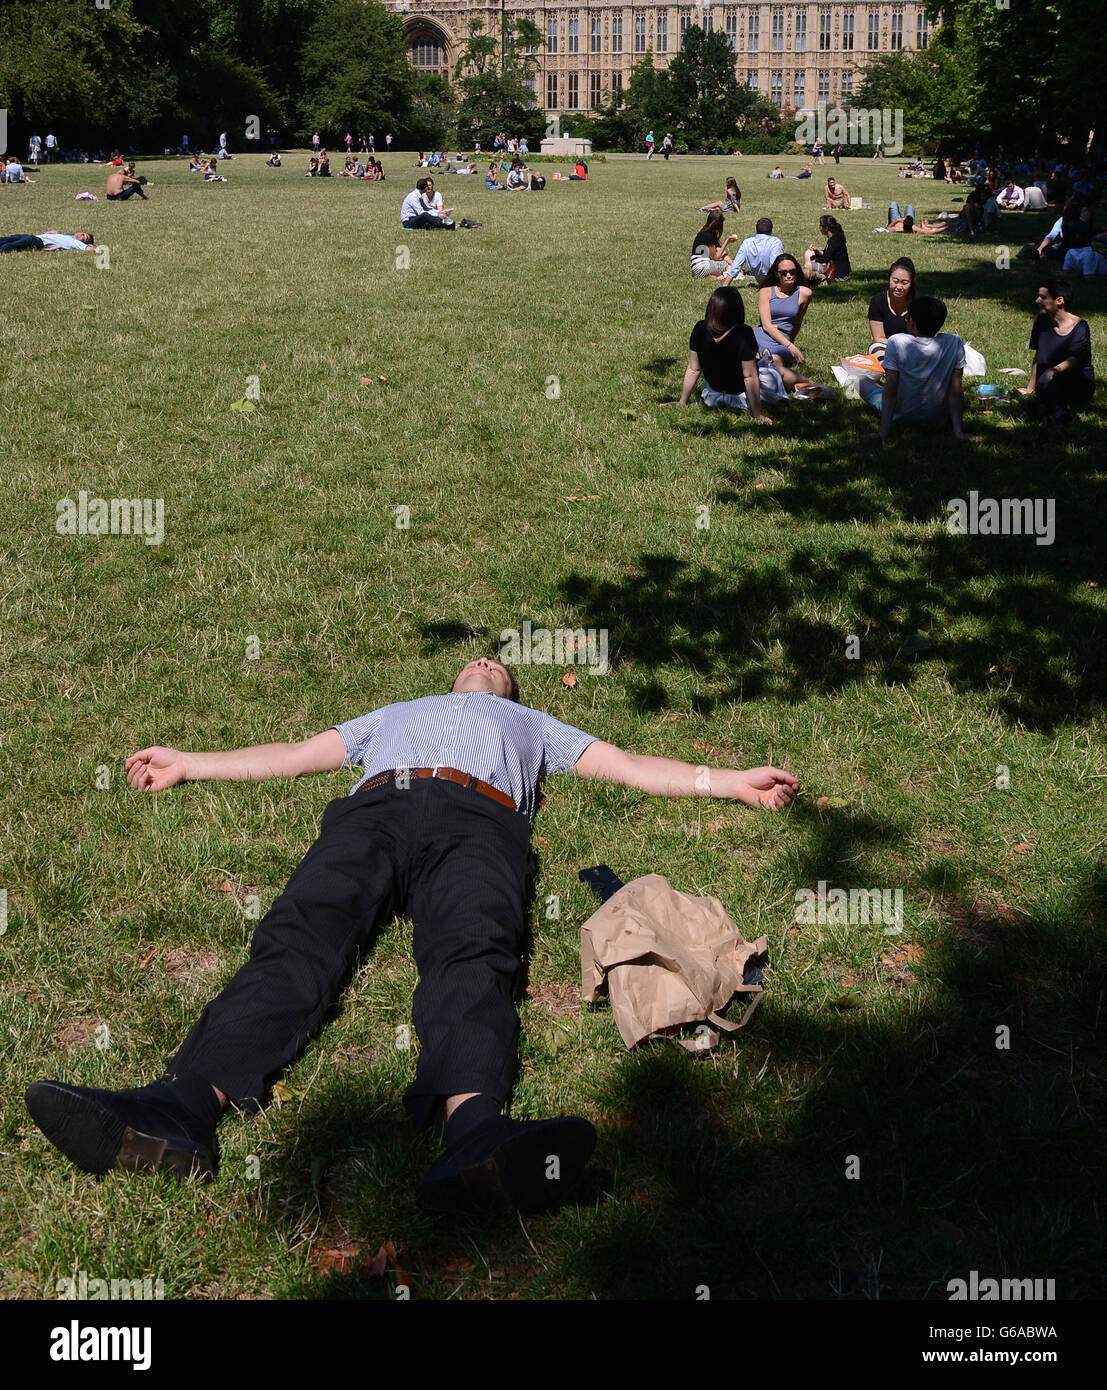 Sunbathers near the Houses of Parliament in London enjoy the hot weather on the first day of August. Stock Photo